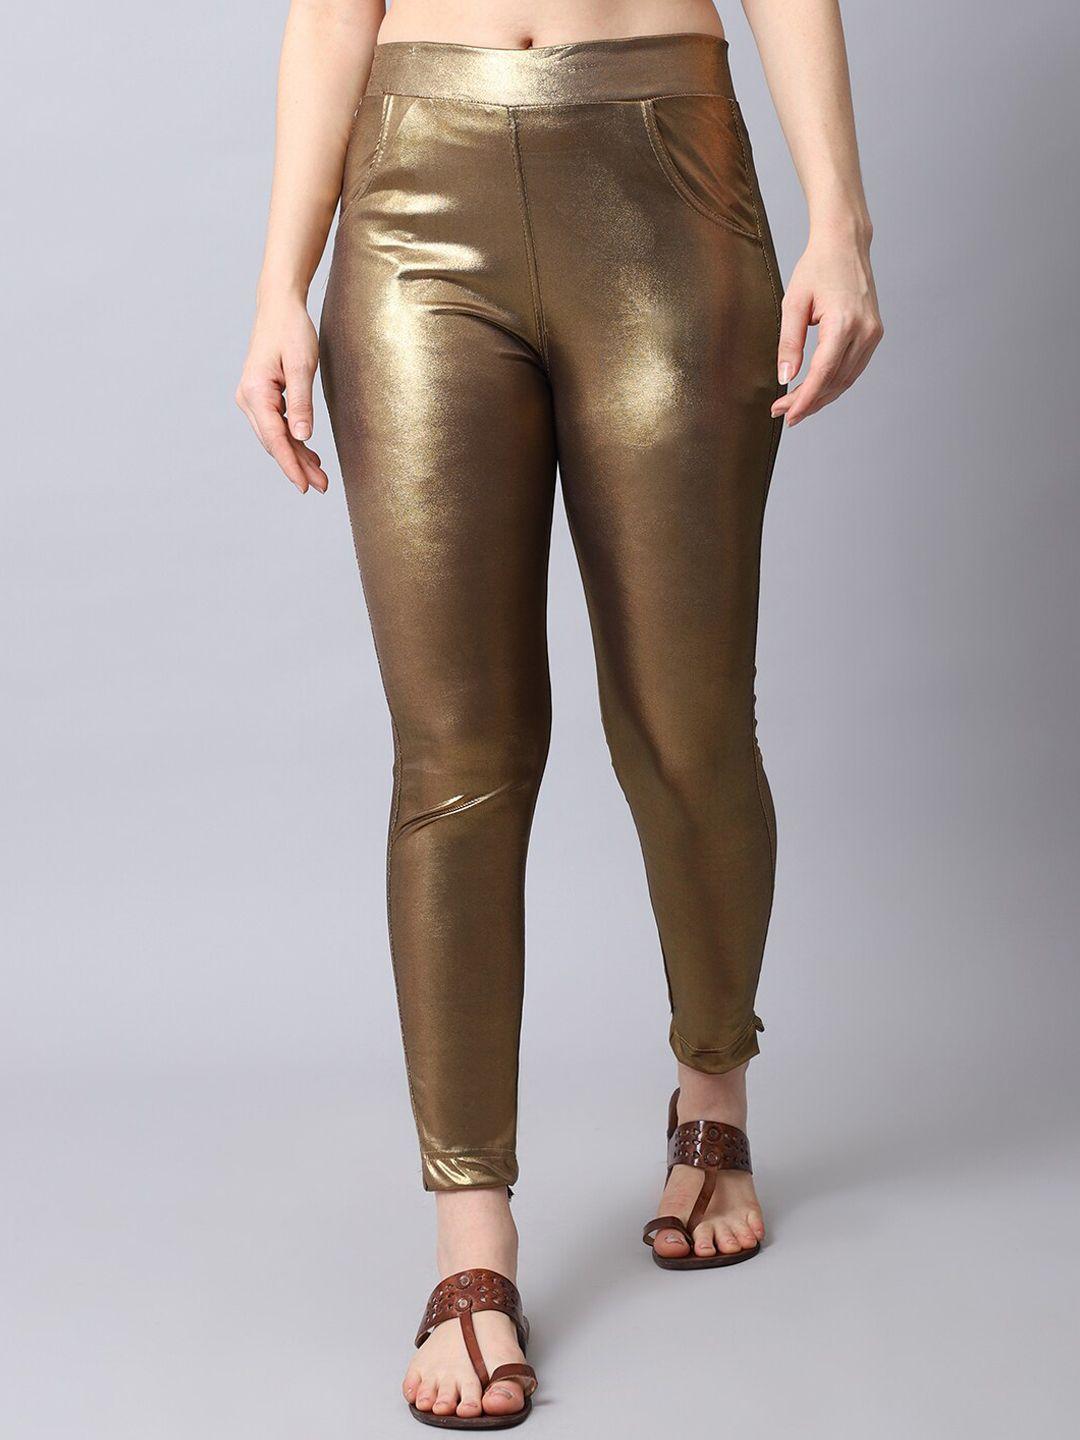 tag 7 women copper solid ankle-length leggings